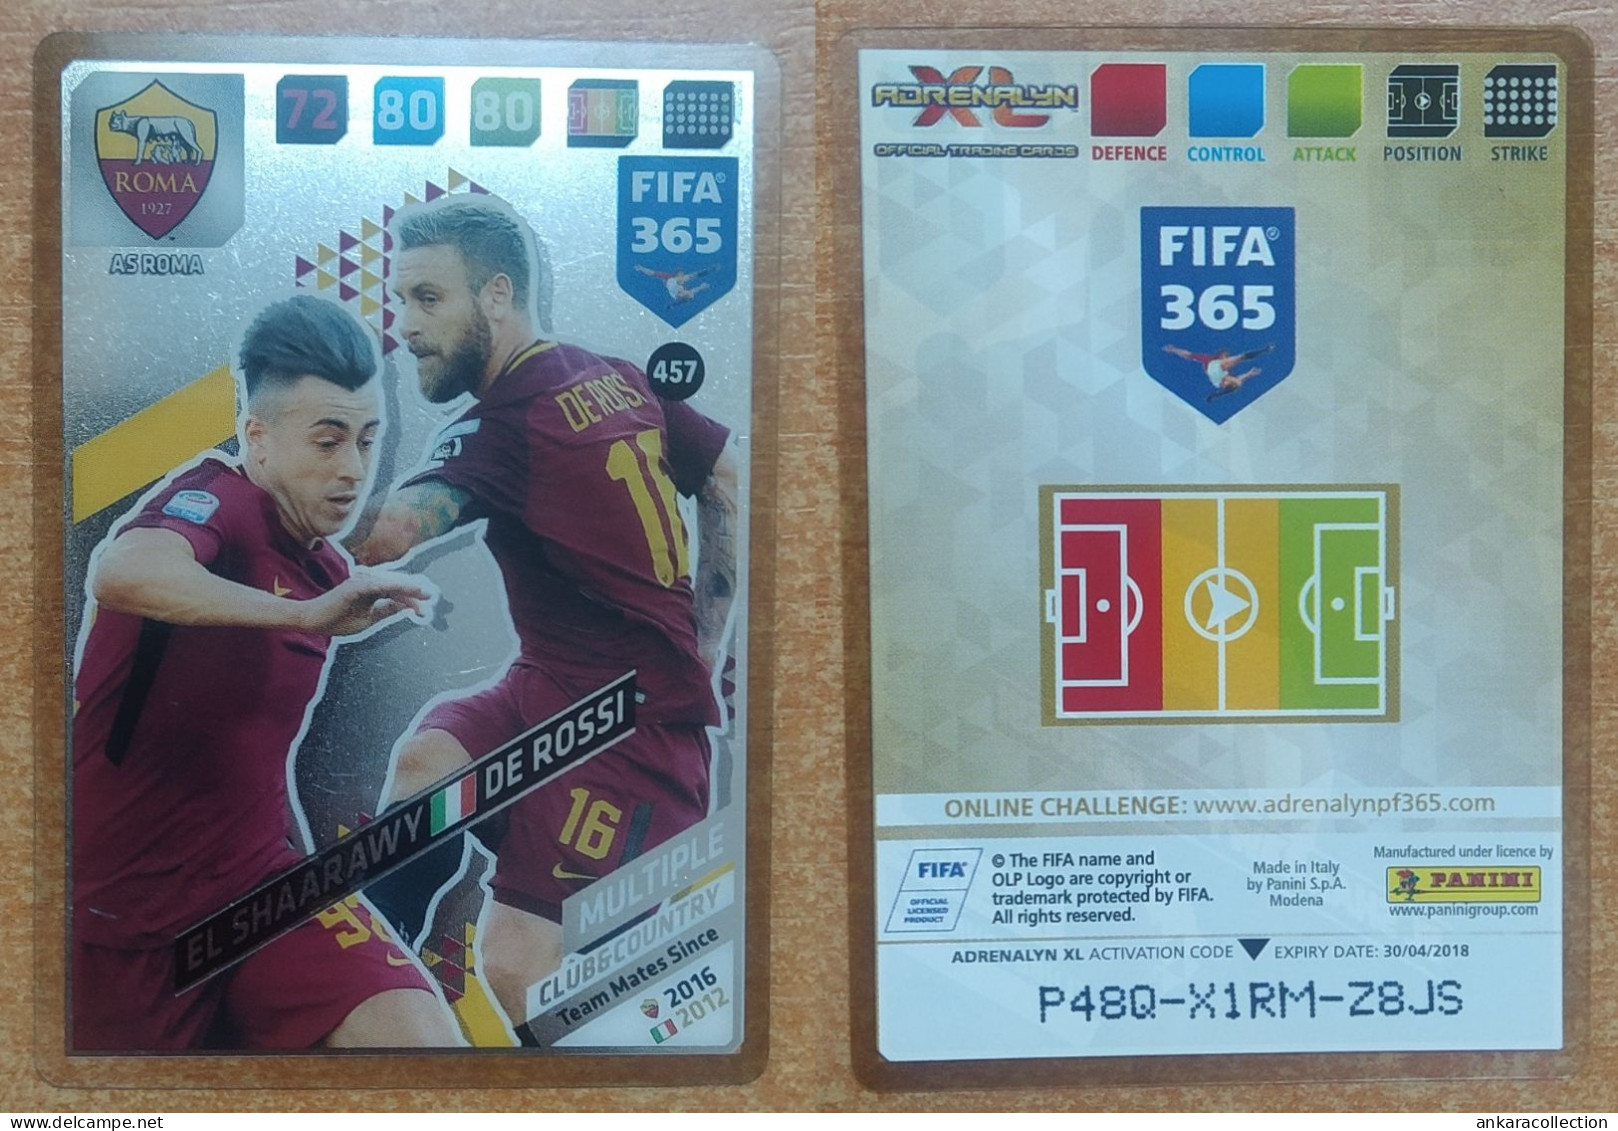 AC - EL SHAARAWY DE ROSSI  MULTIPLE CLUB & COUNTRY   TEAM MATE  AS ROMA  PANINI FIFA 365 2018 ADRENALYN TRADING CARD - Trading-Karten